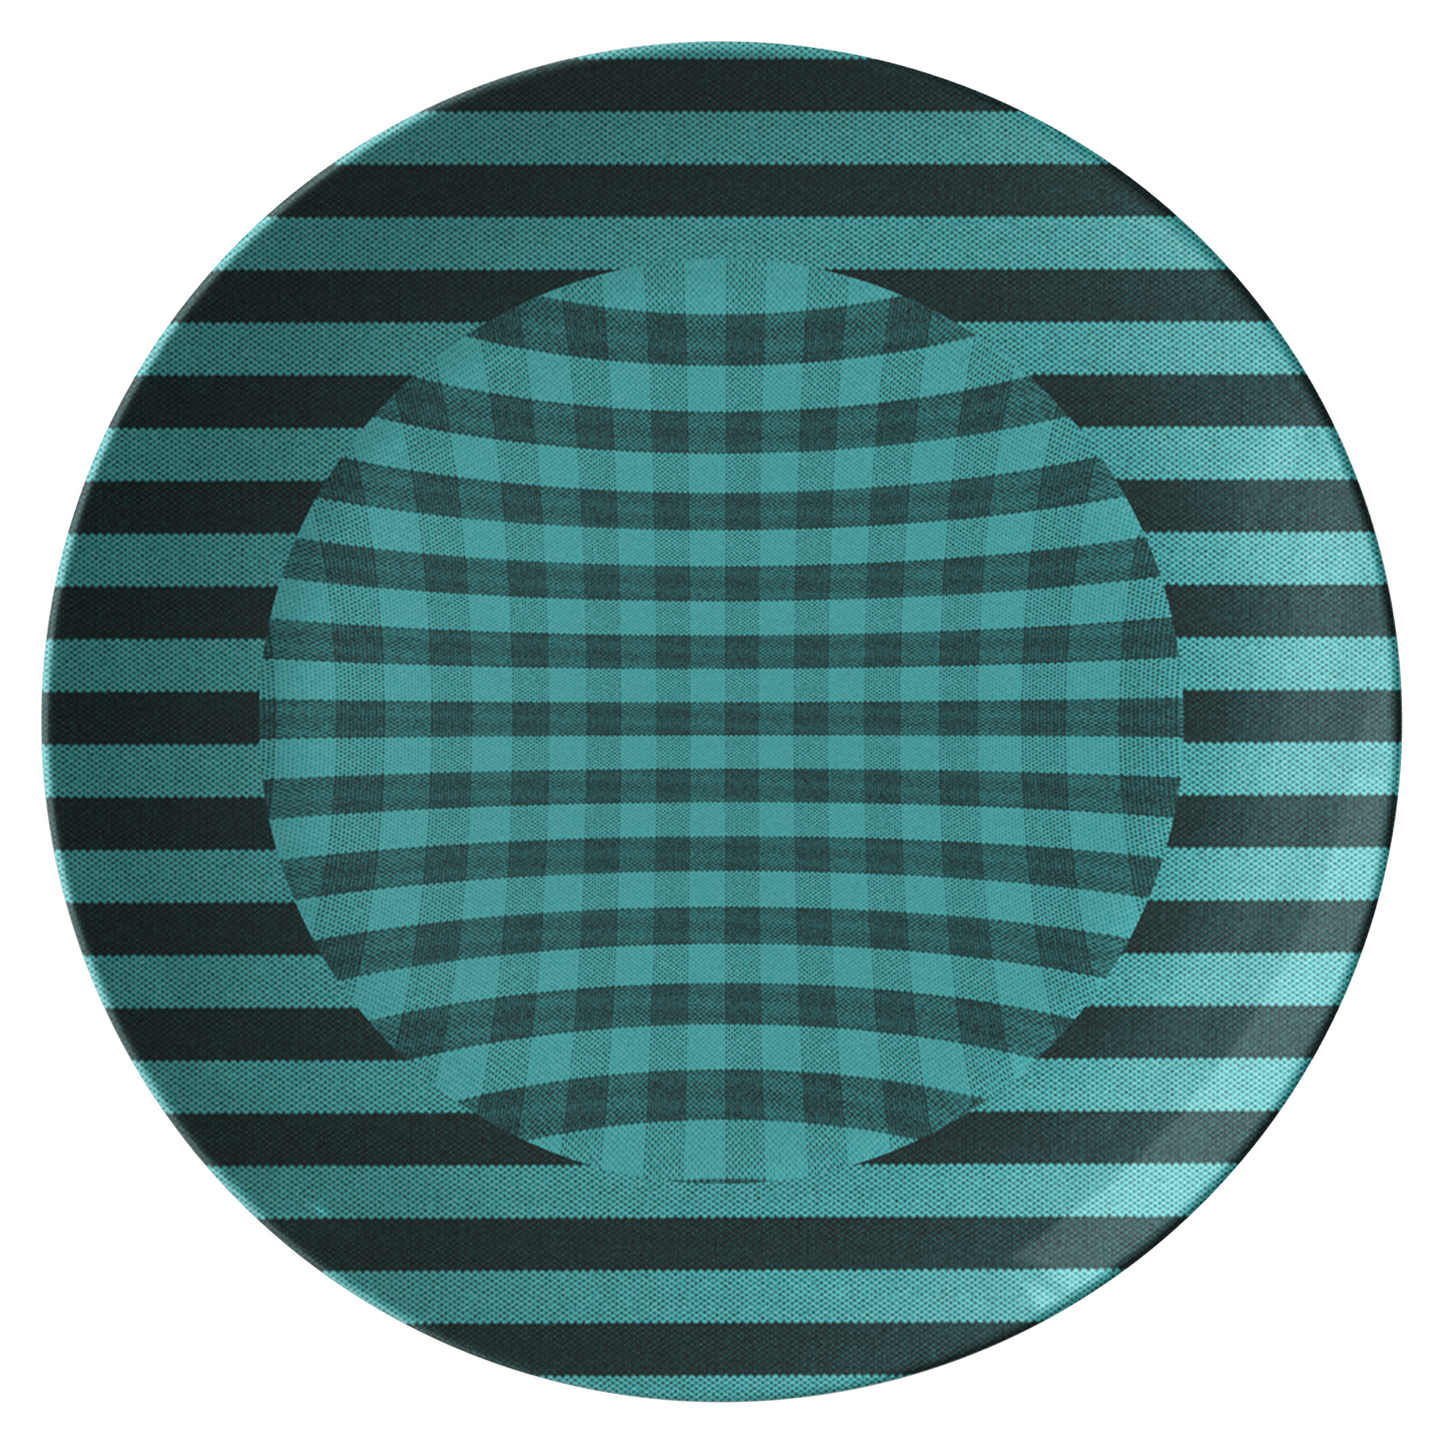 Chemise Teal Dinner Plate from Vluxe by Lucky Nahum